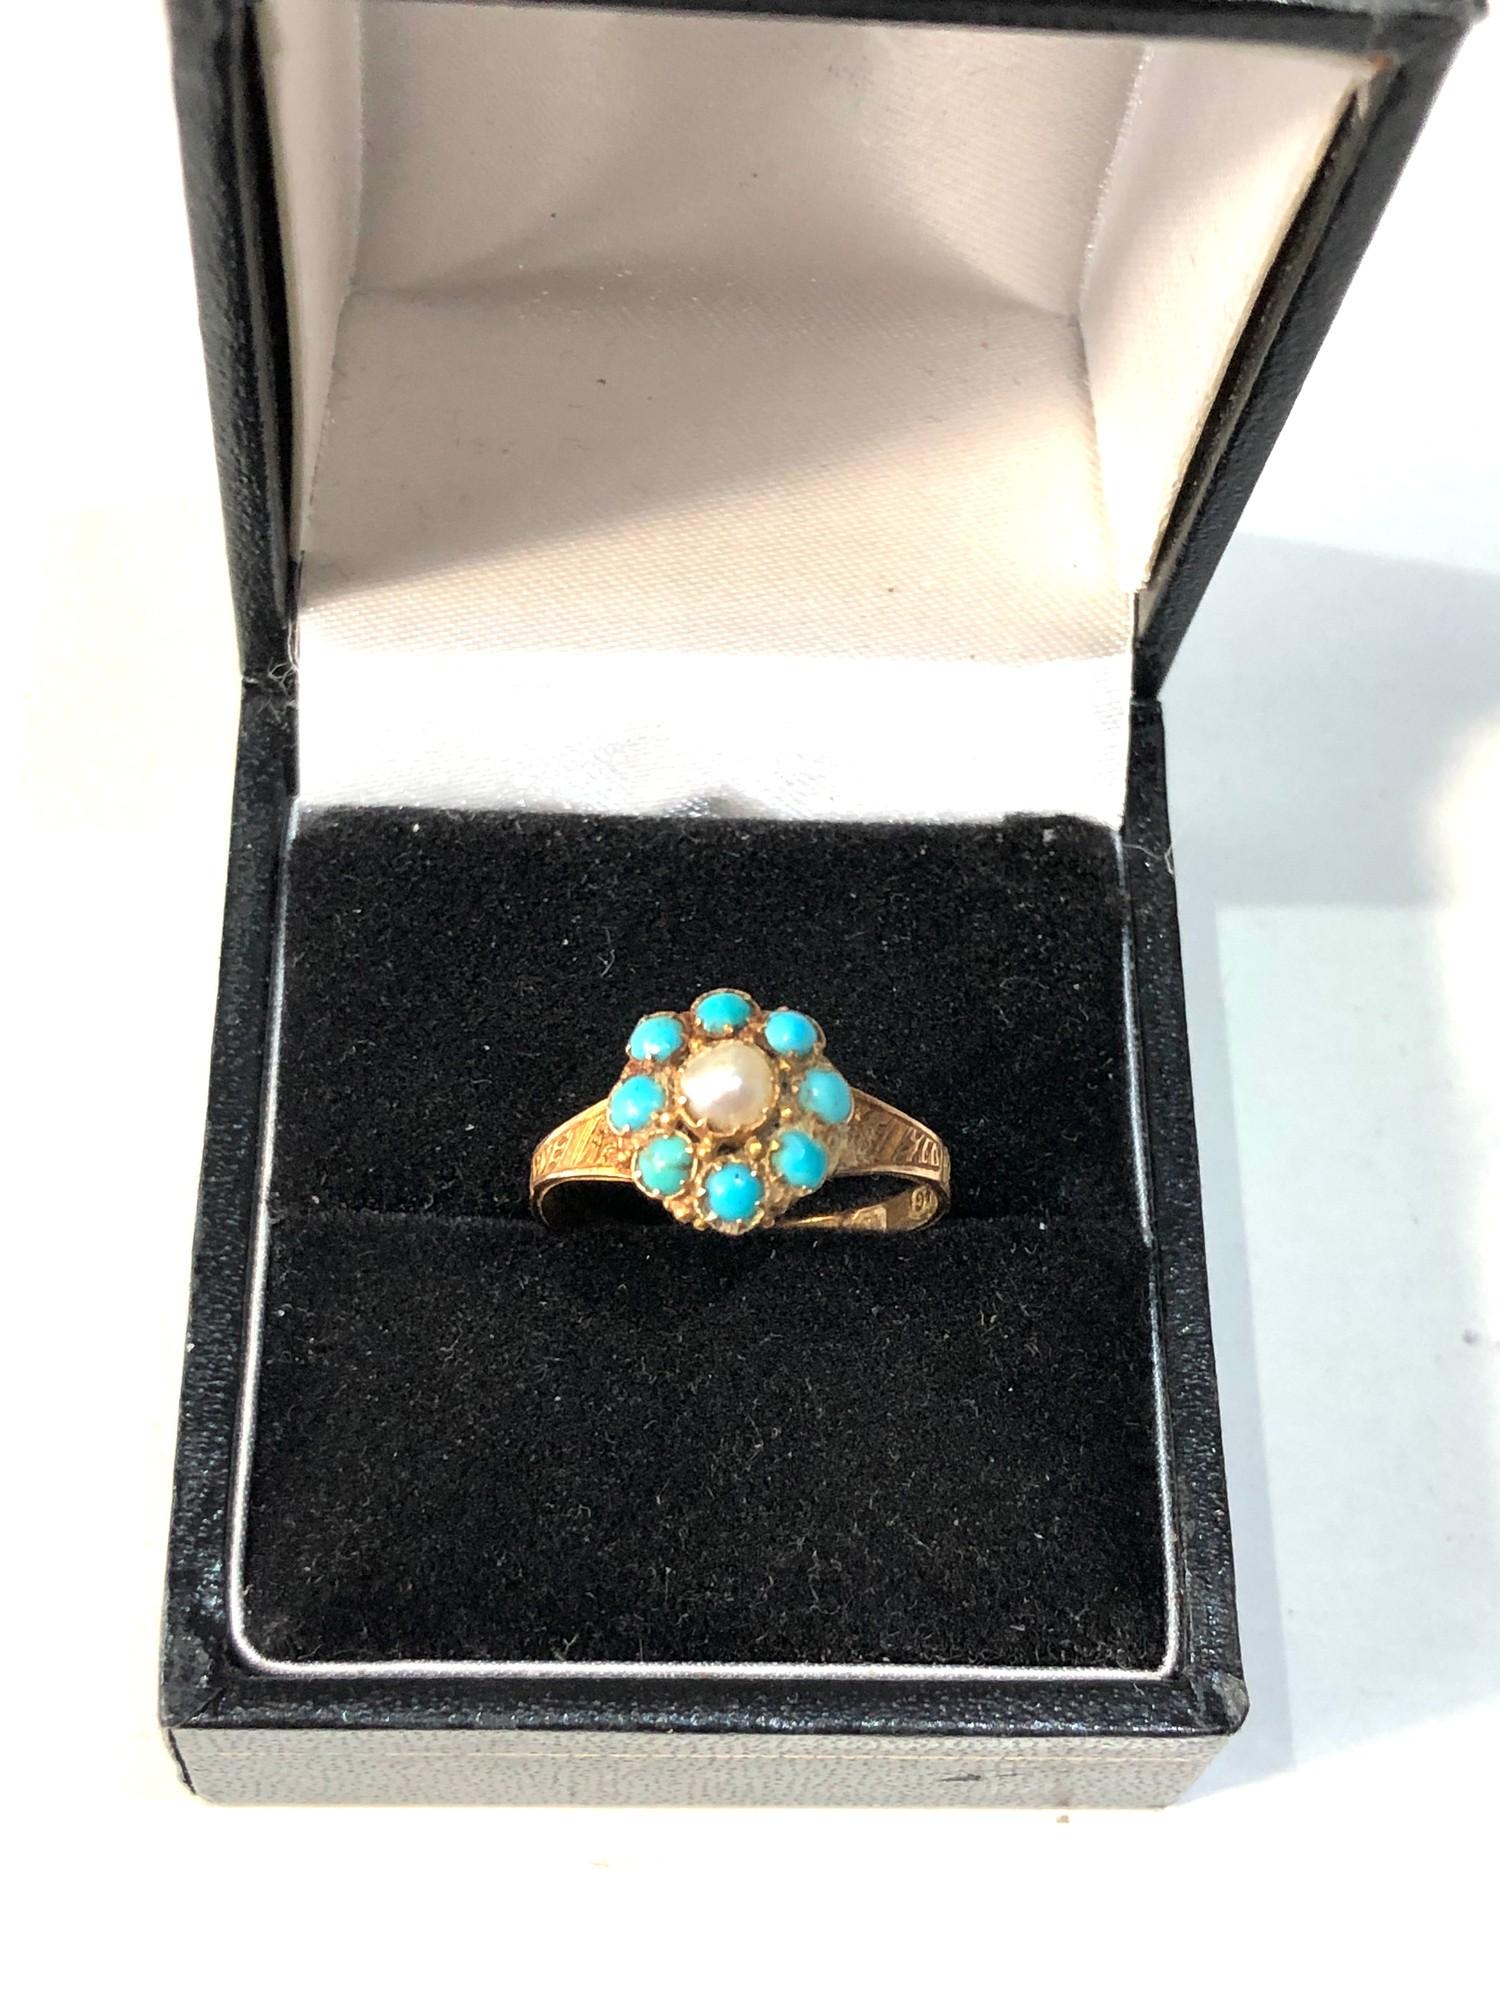 15ct gold antique turquoise and pearl ring weight 2g